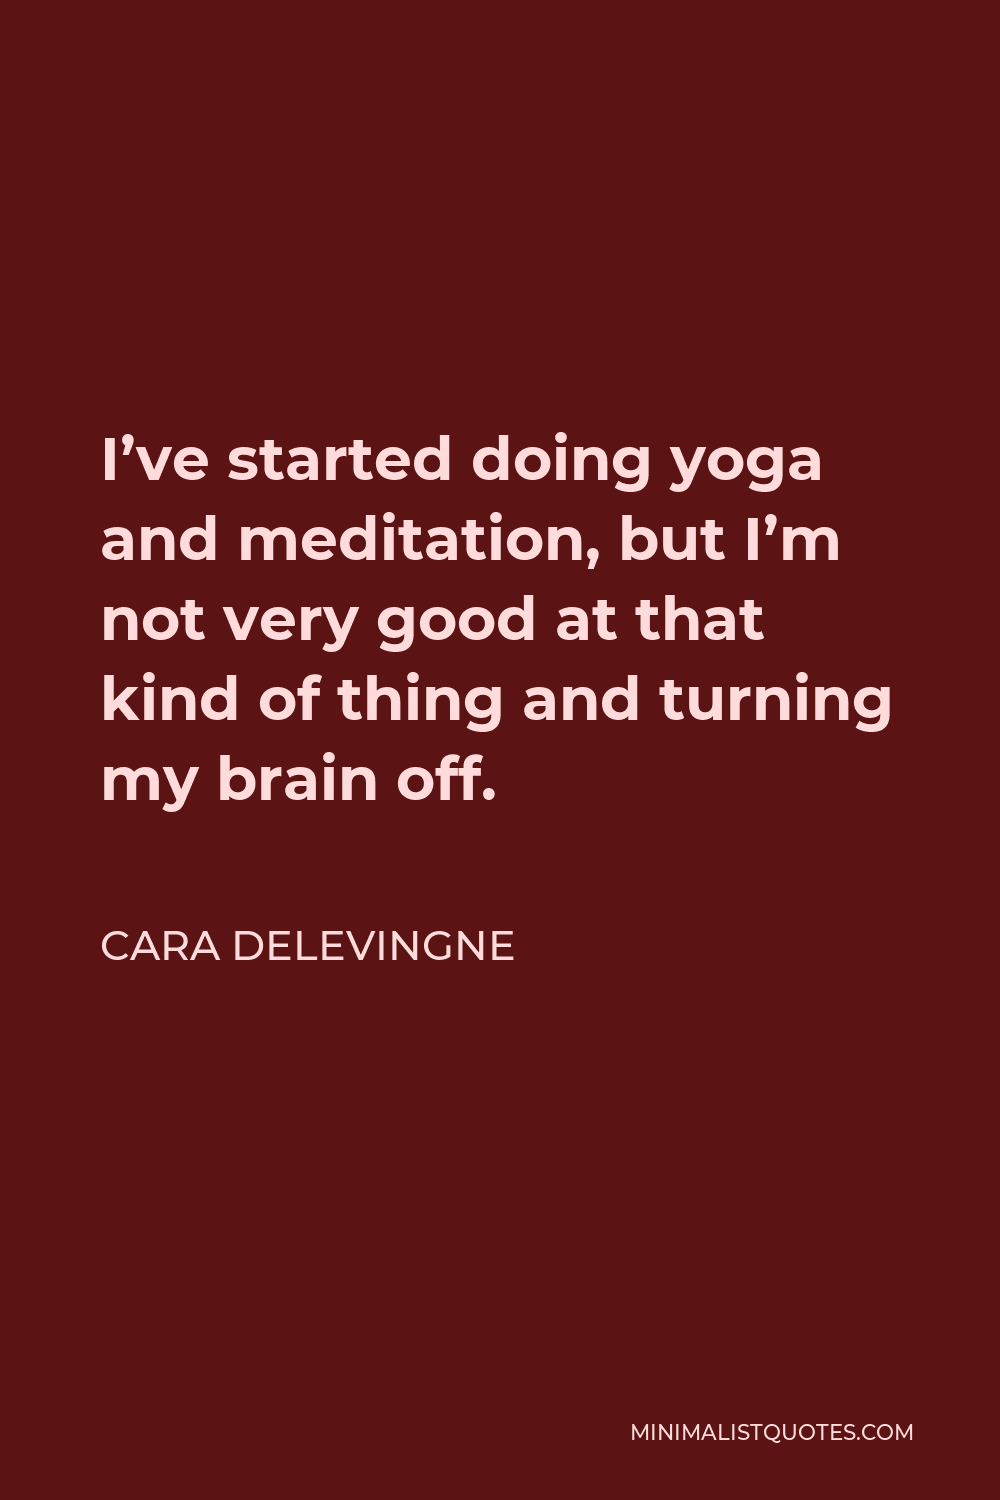 Cara Delevingne Quote - I’ve started doing yoga and meditation, but I’m not very good at that kind of thing and turning my brain off.